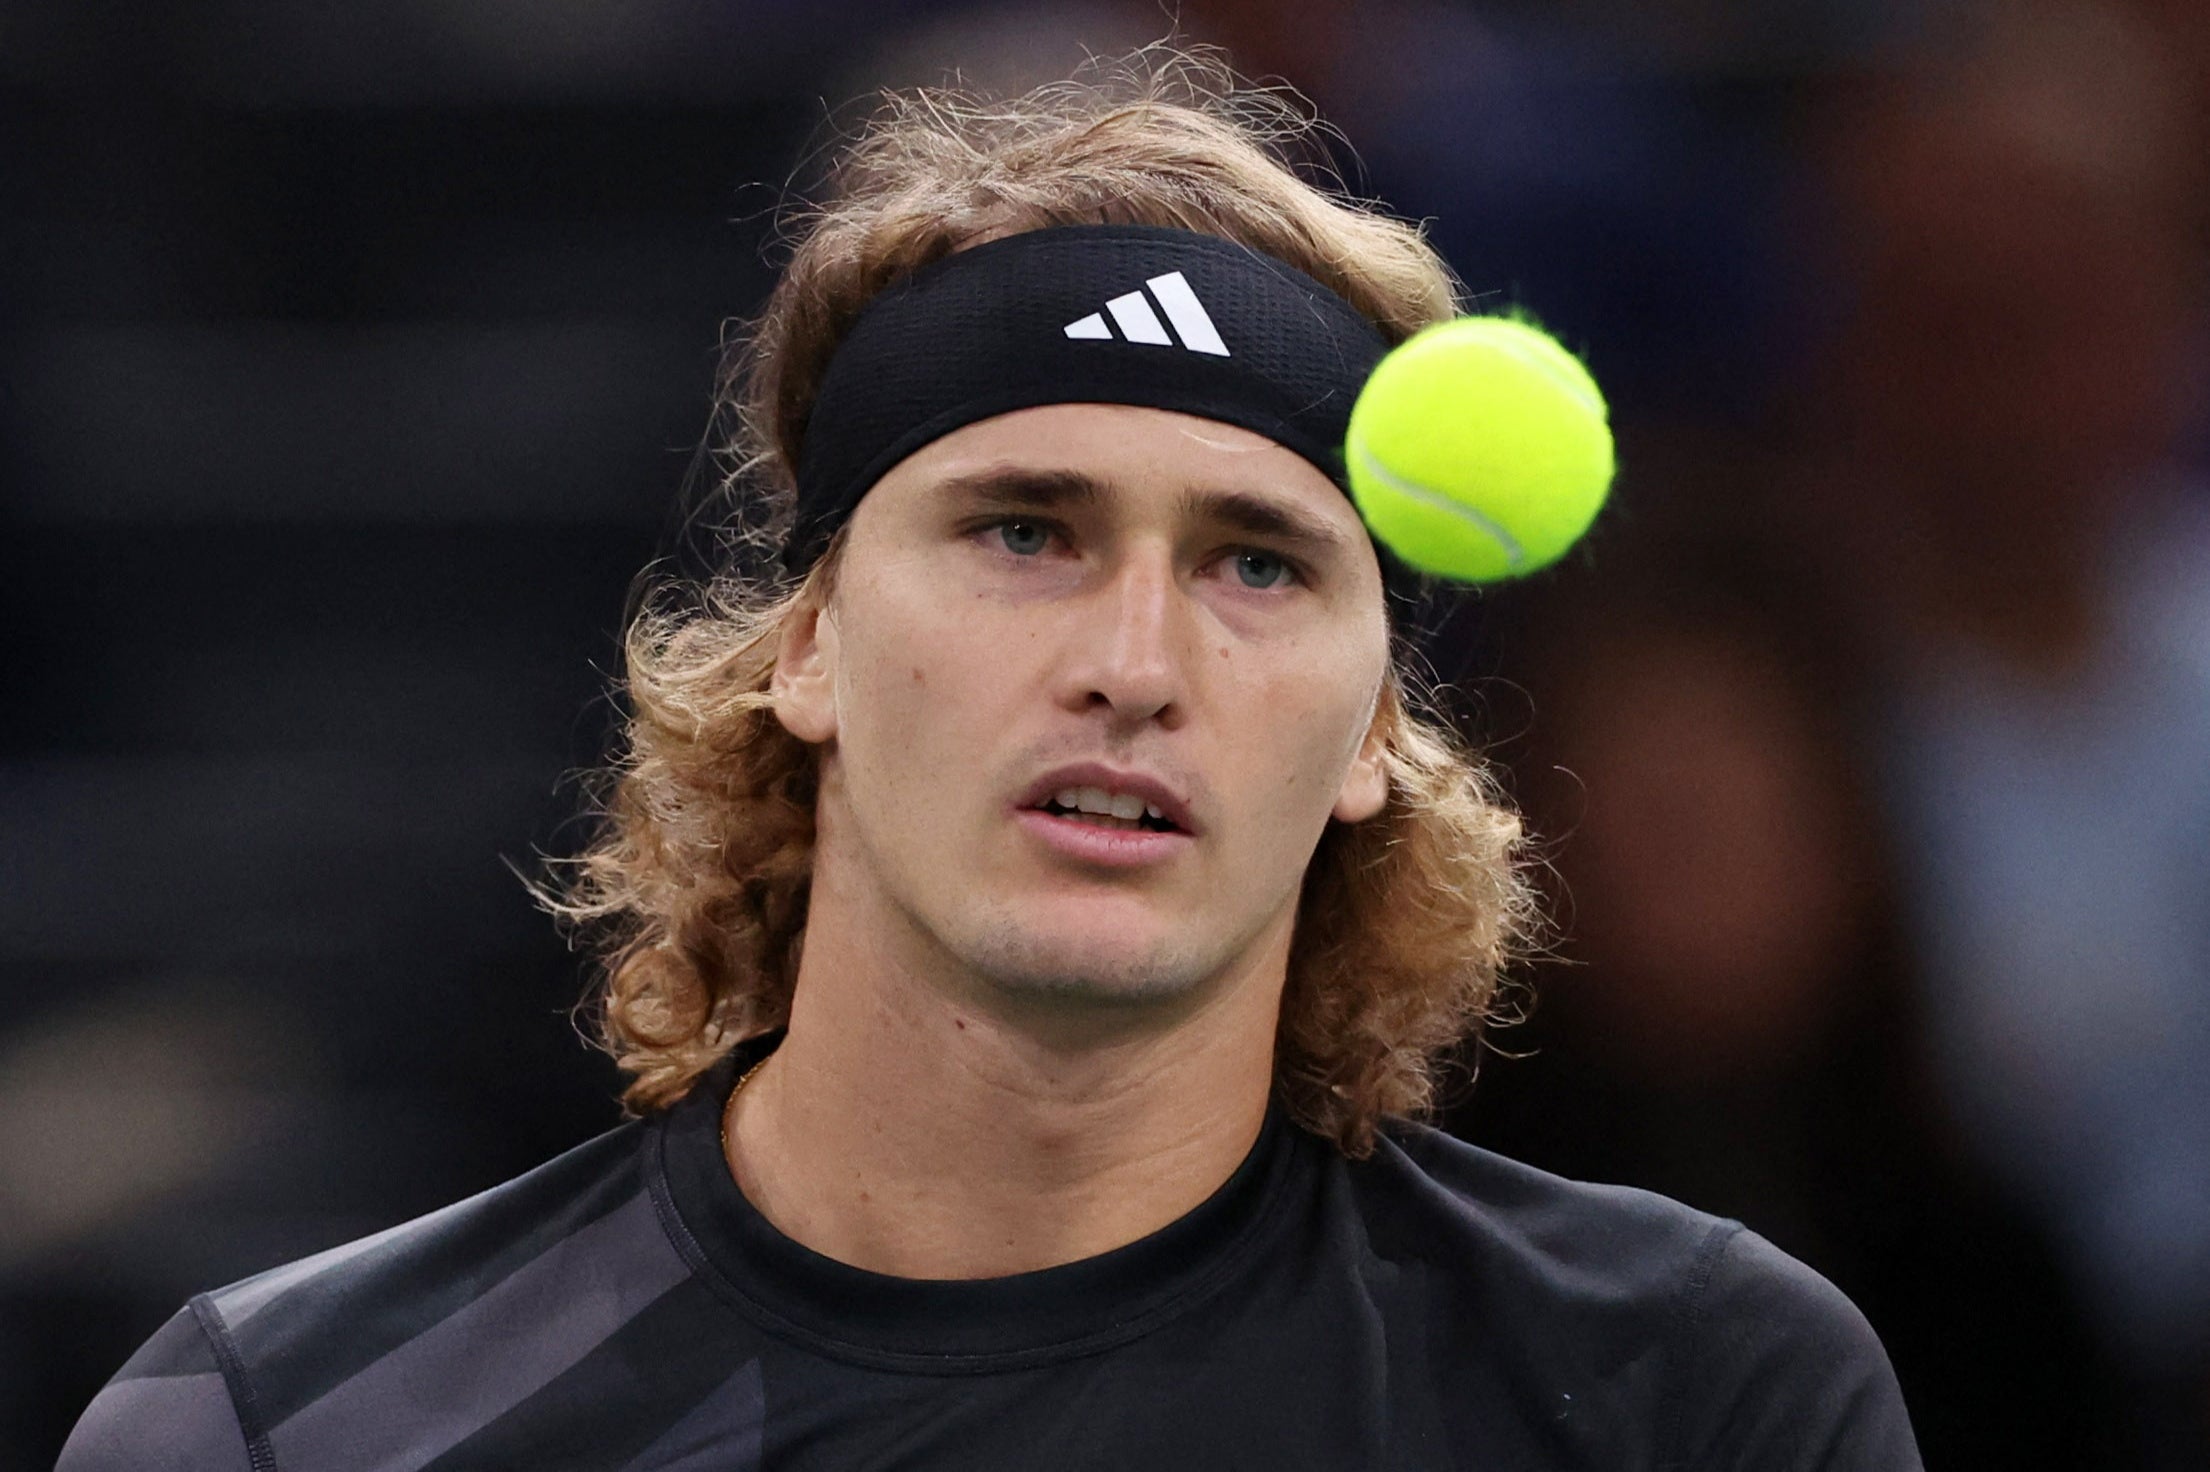 Alexander Zverev has been fined by the german courts